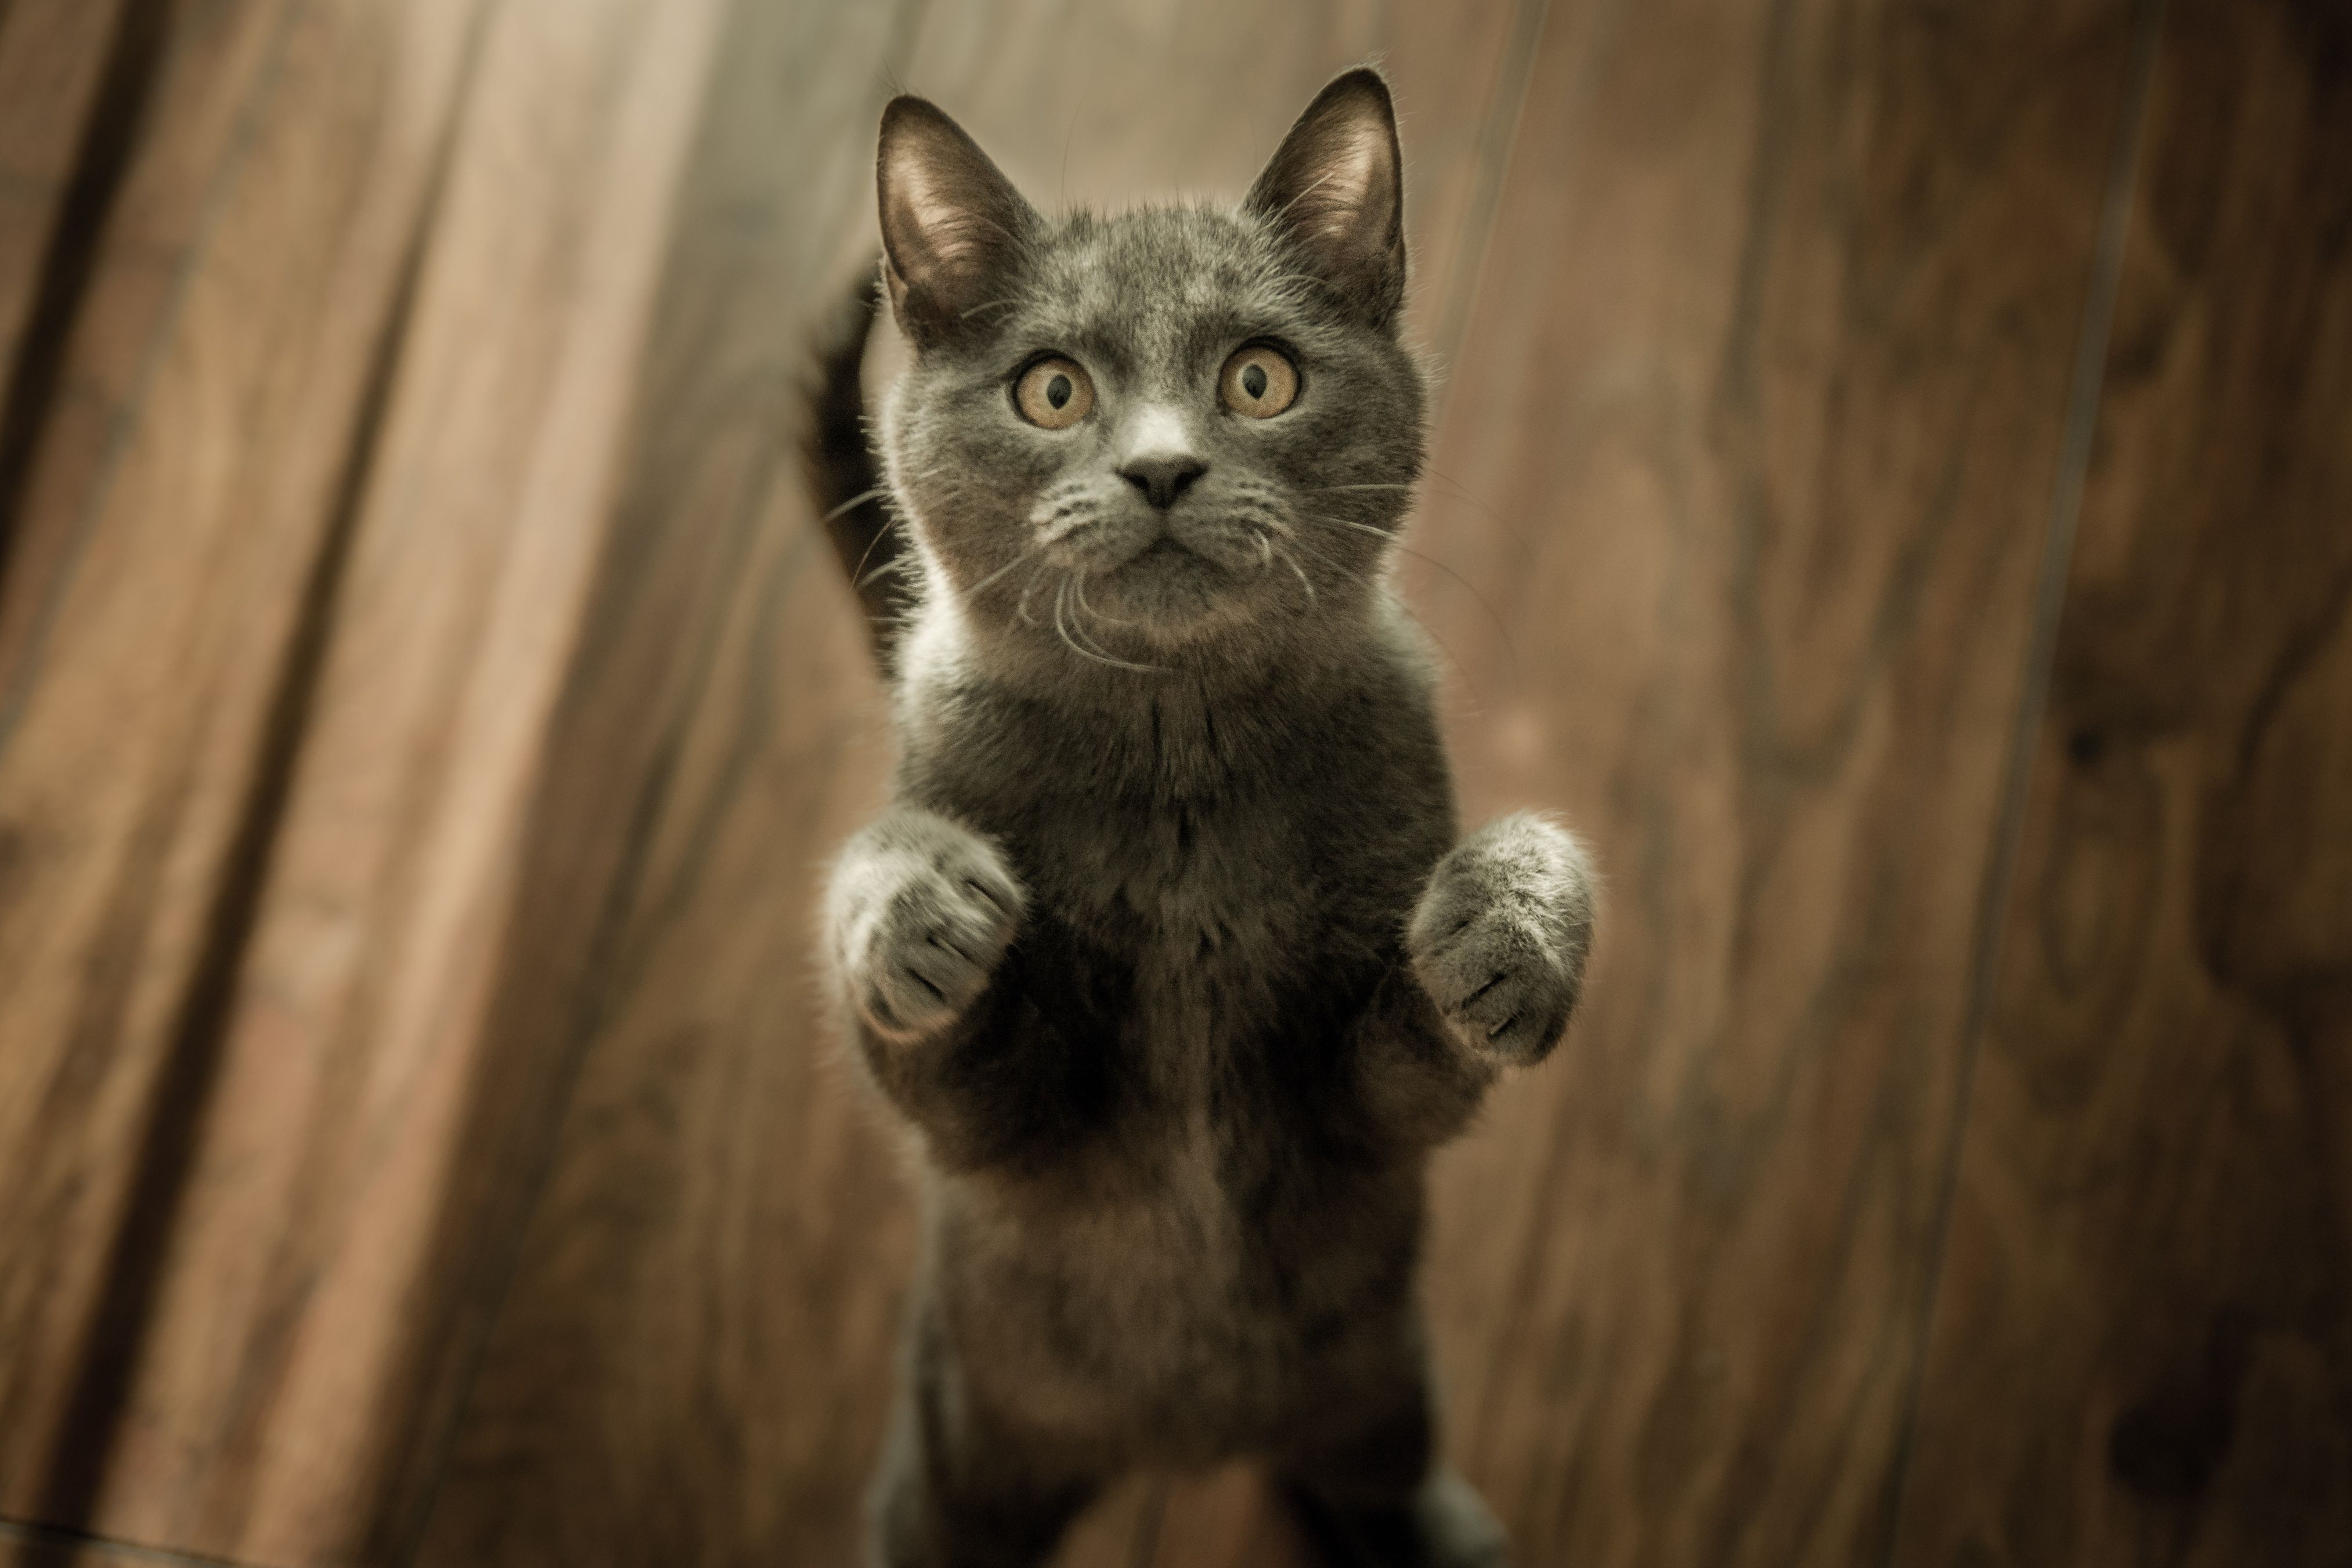 A gray cat standing on its hind legs